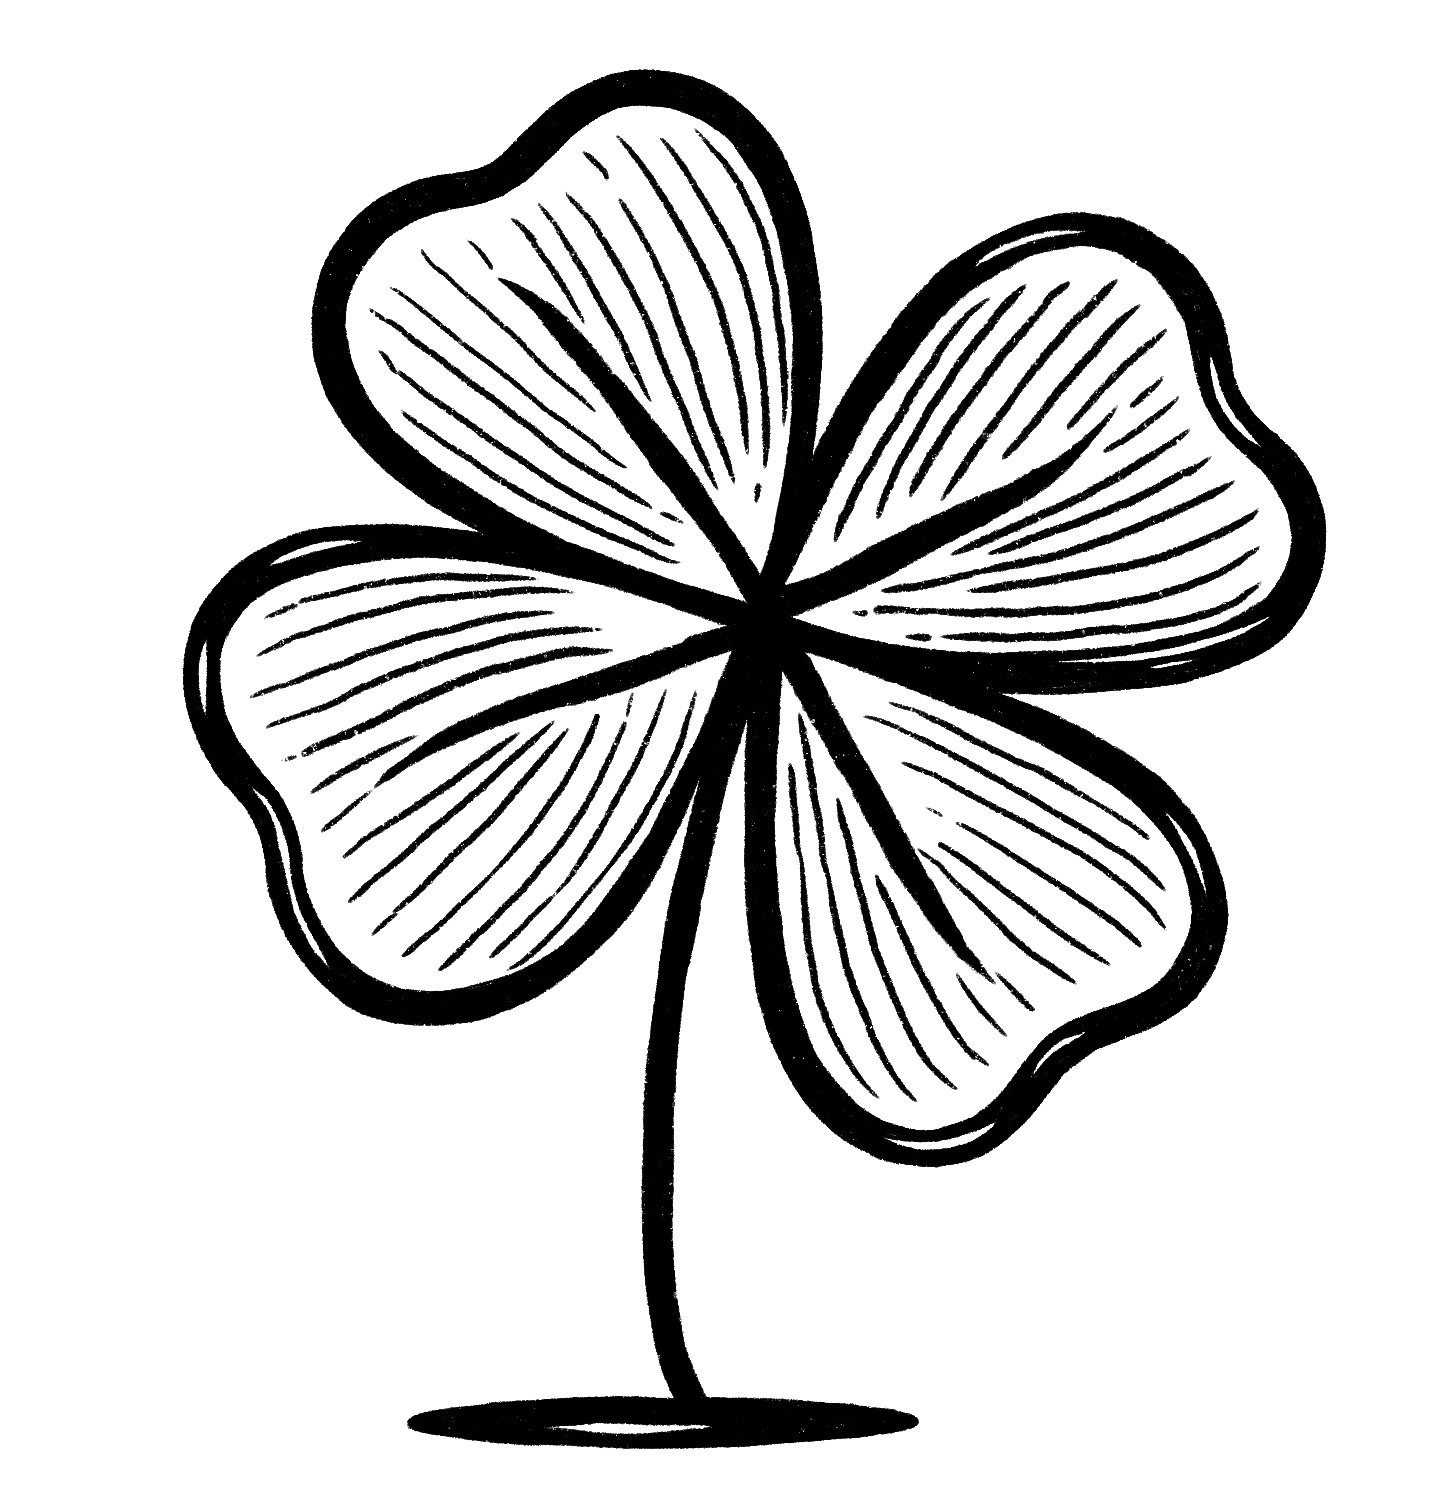 How to Draw a Four Leaf Clover Tutorial Video and Coloring Page